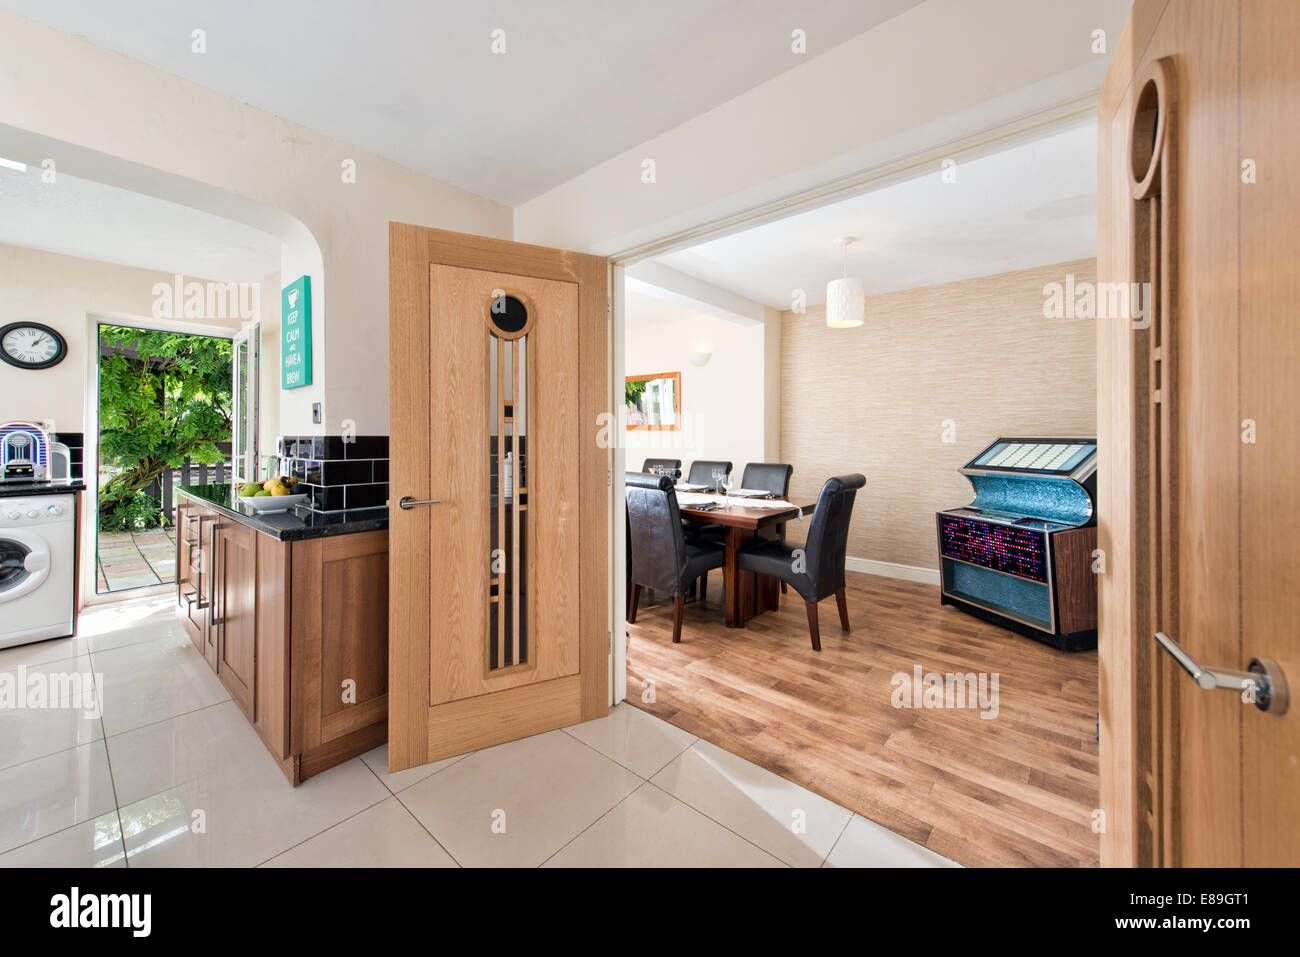 A view through double, solid wood doors from a kitchen in to a dining room in an extended & renovated home, UK Stock Photo